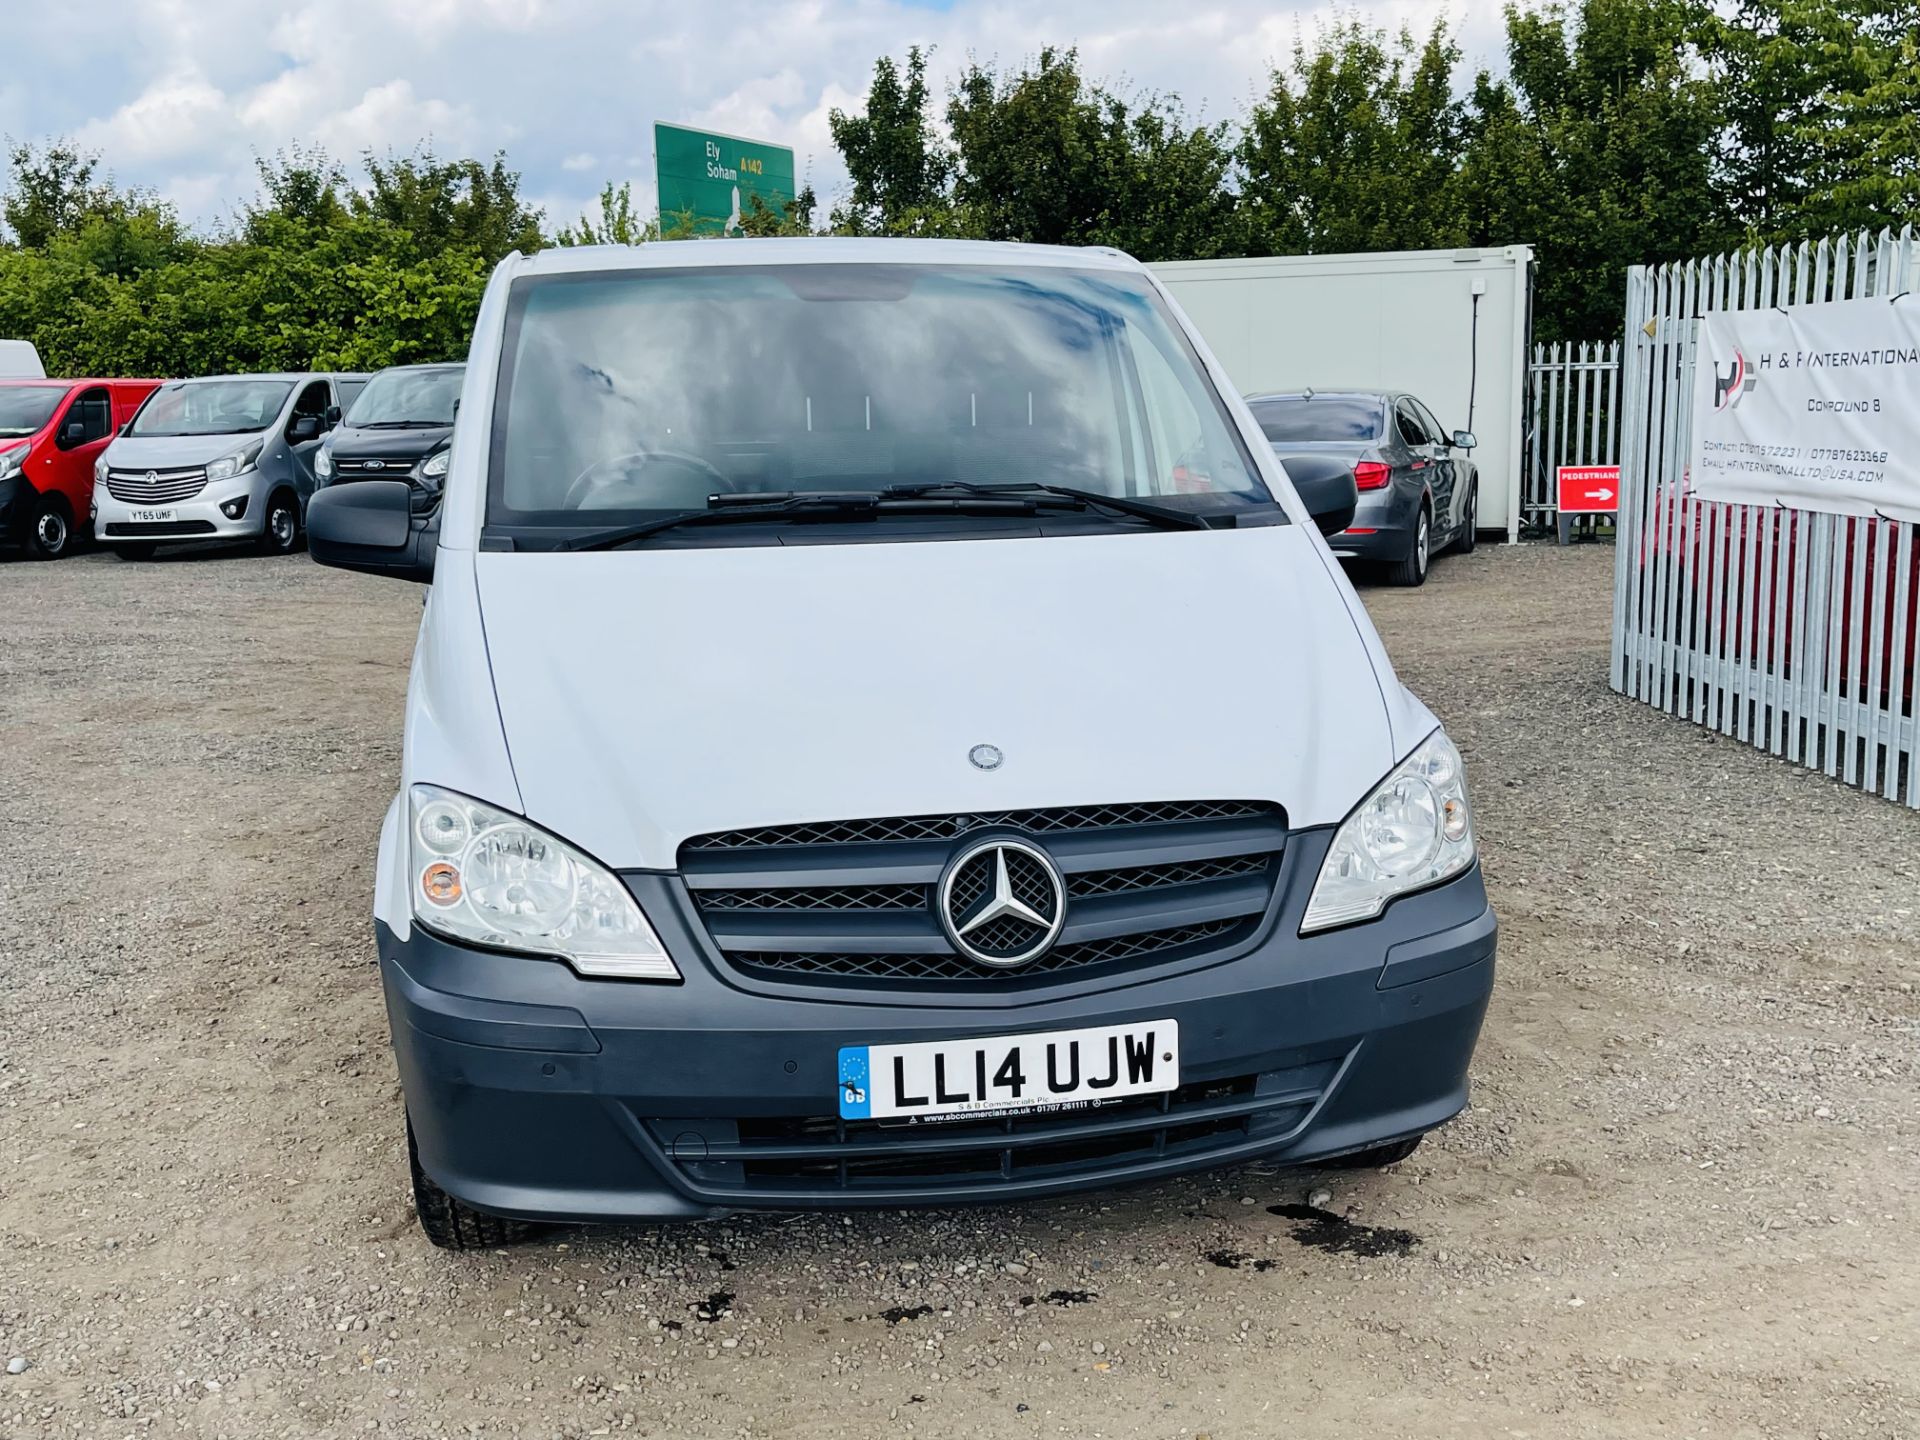 ** ON SALE ** Mercedes-Benz Vito 2.1 113 CDI Long Low Roof - 2014 '14 Reg' - Cruise Control - - Image 2 of 17